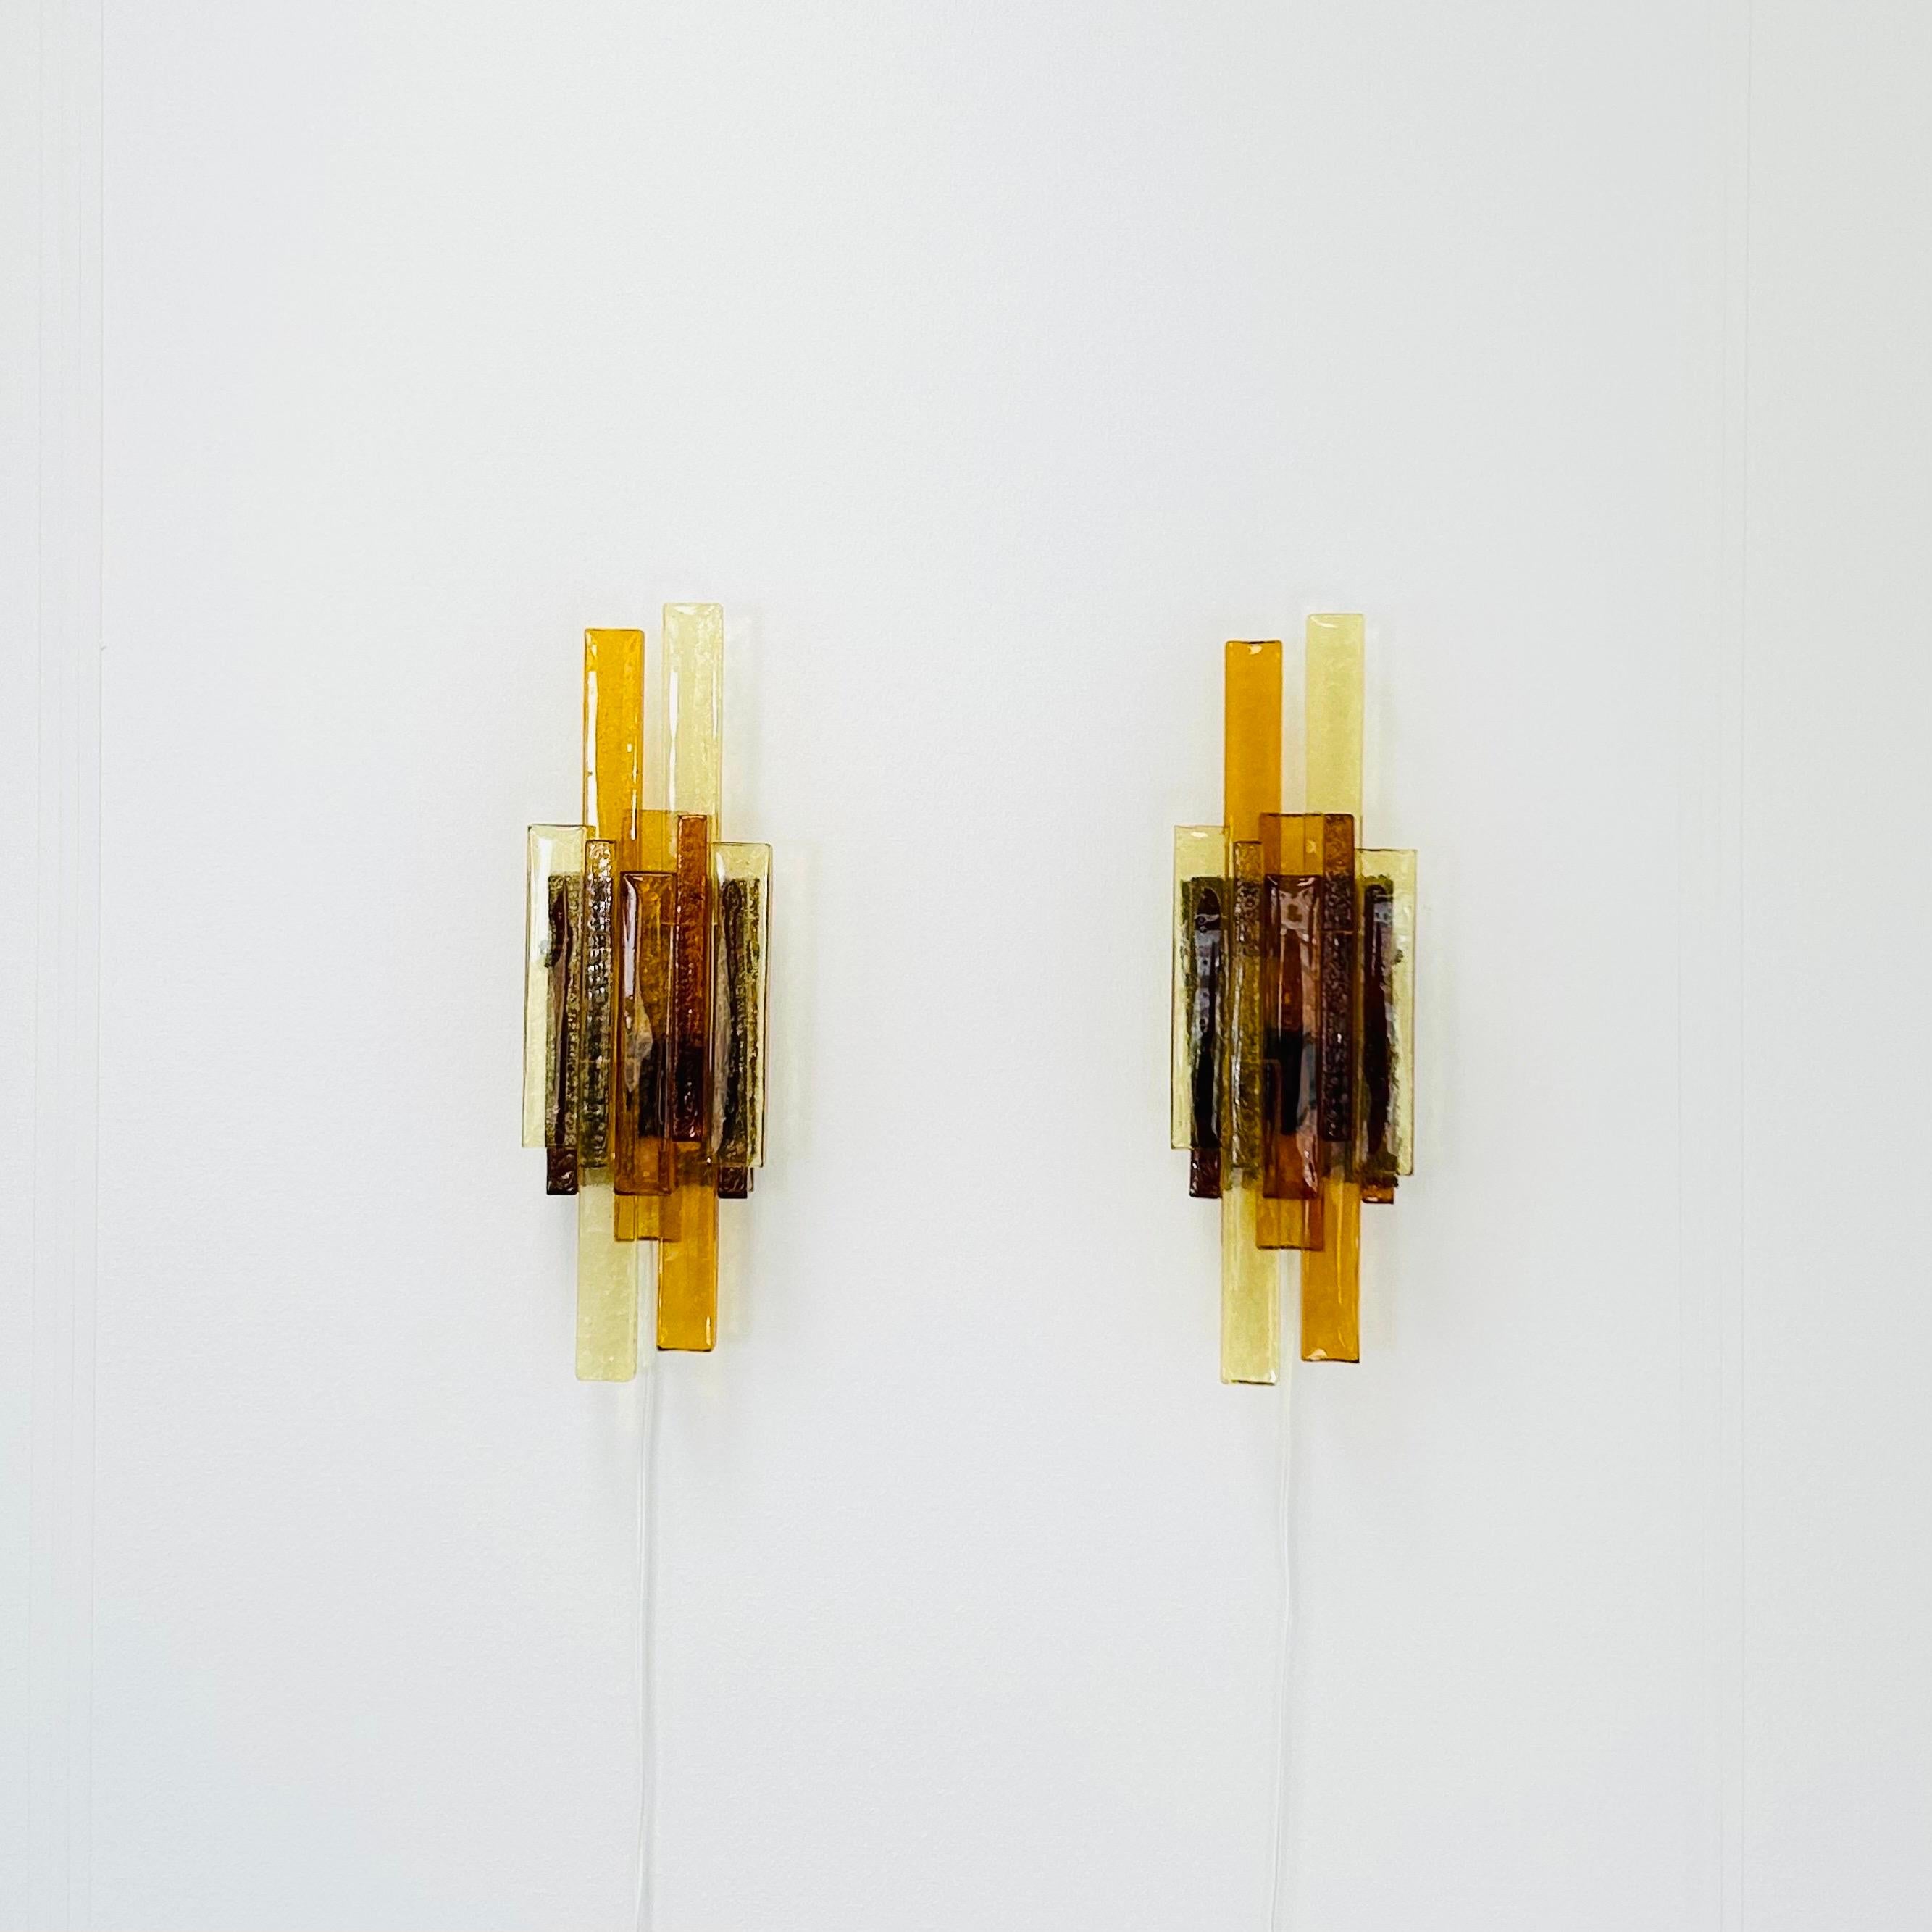 Danish Pair of Yellow and Amber Glass Wall Lamps by Holm Sørensen, 1960s, Denmark For Sale